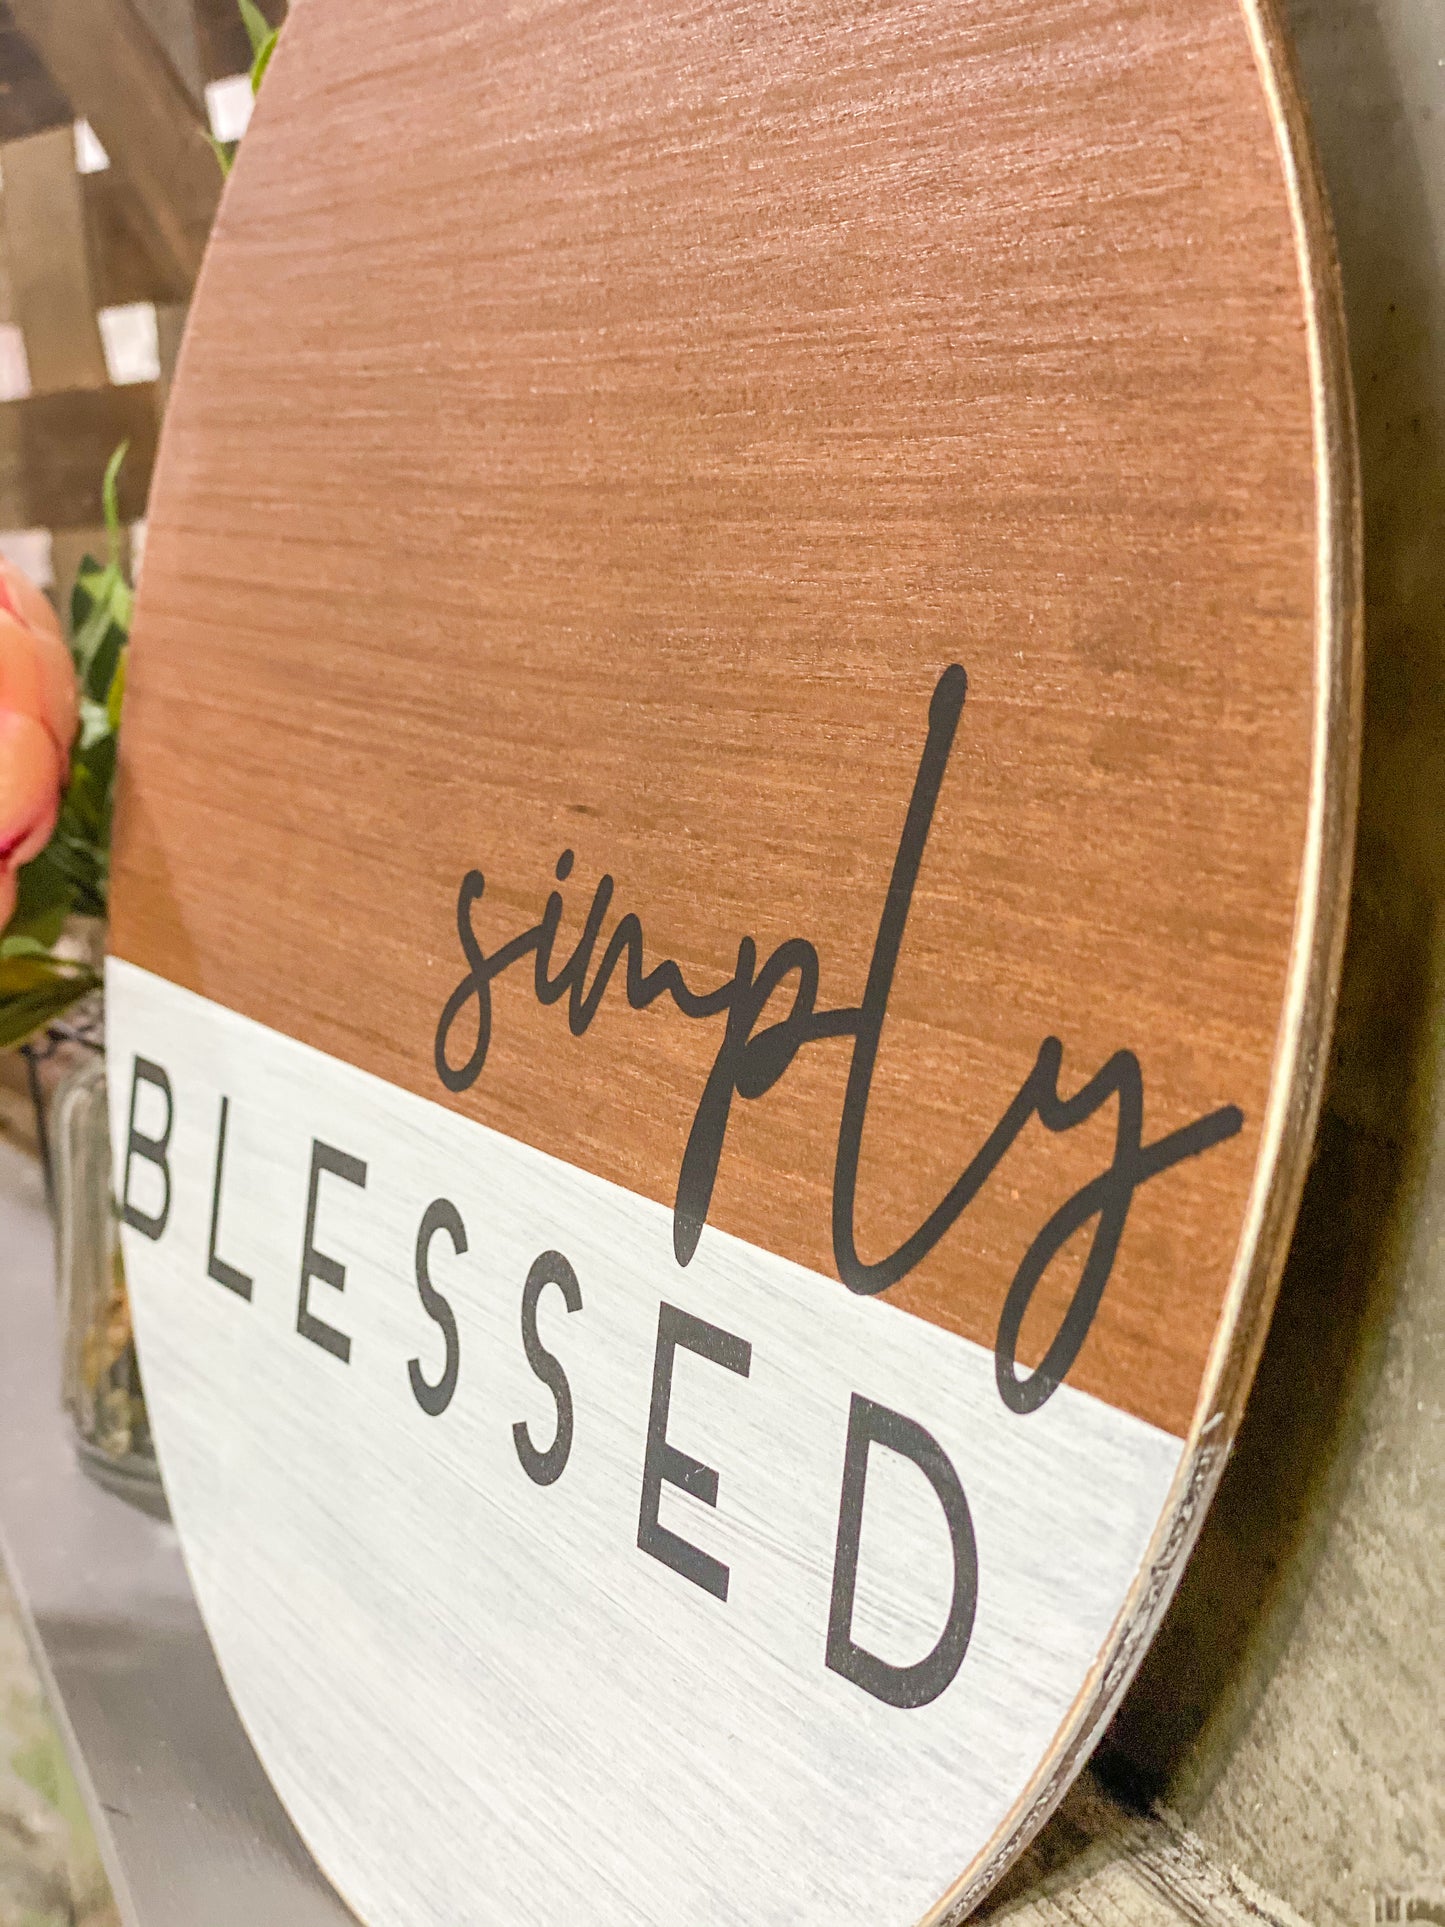 Simply Blessed Round Wood Sign